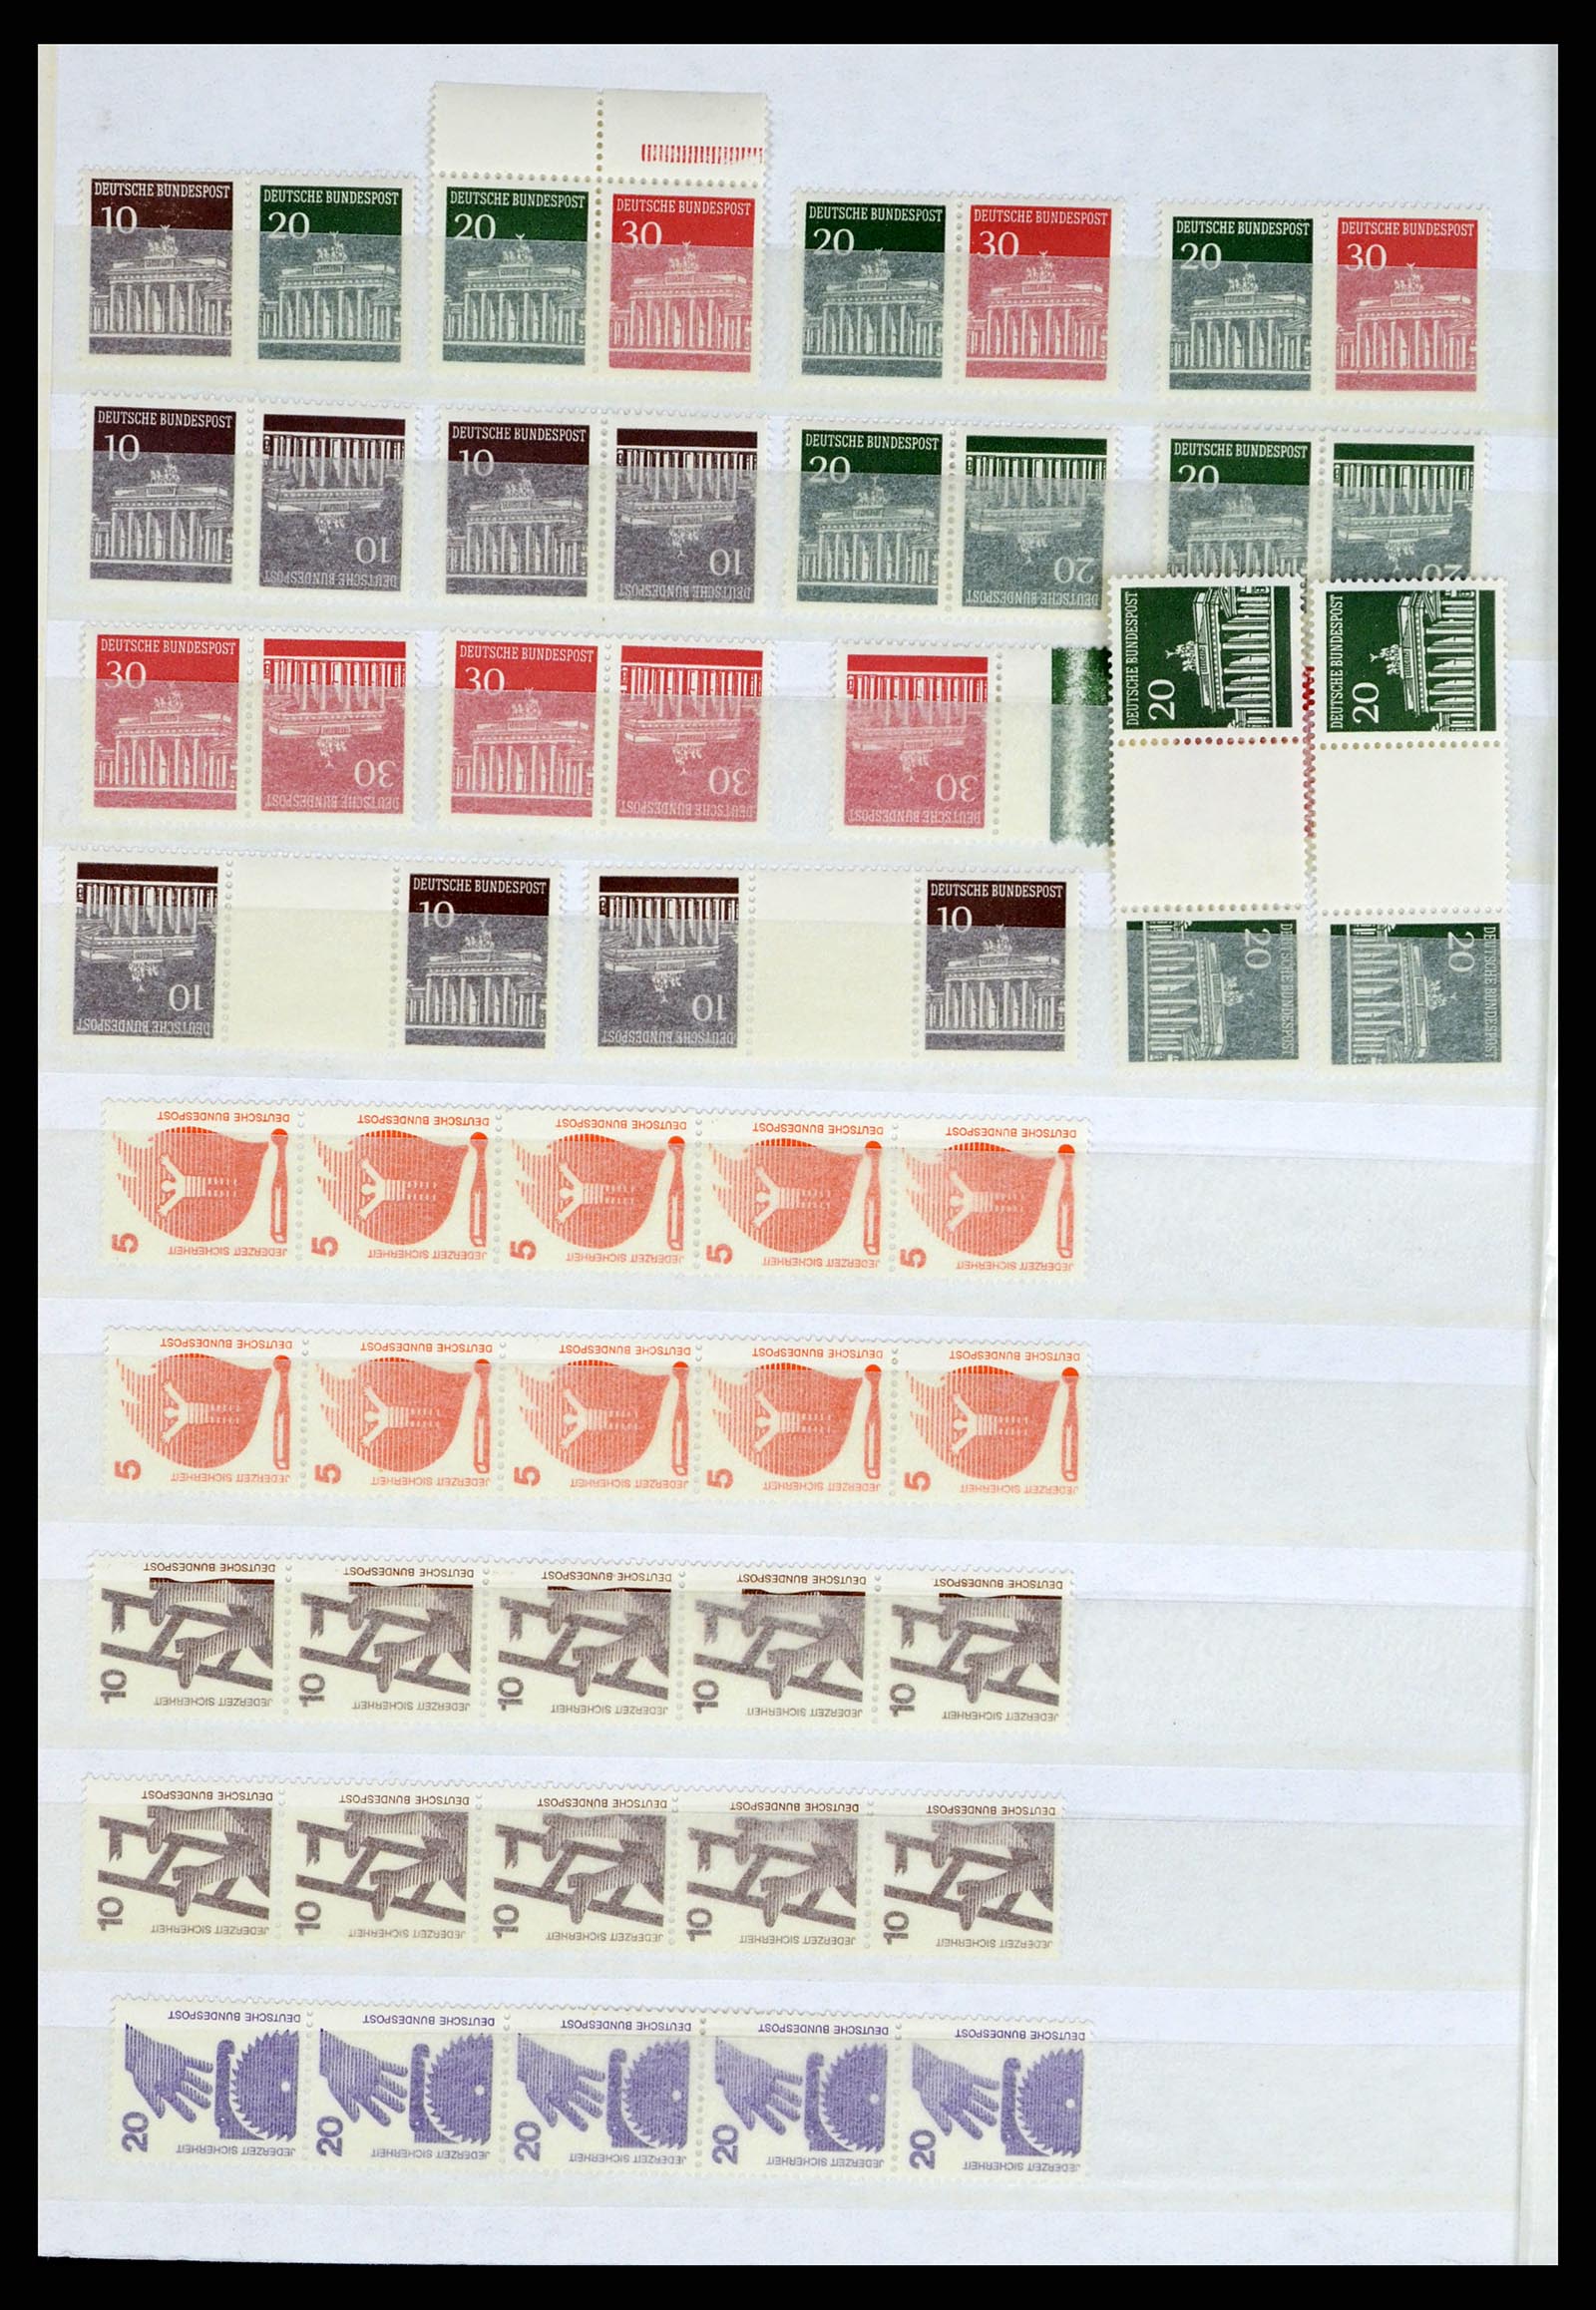 37354 058 - Stamp collection 37354 Bundespost and Berlin 1955-2000.